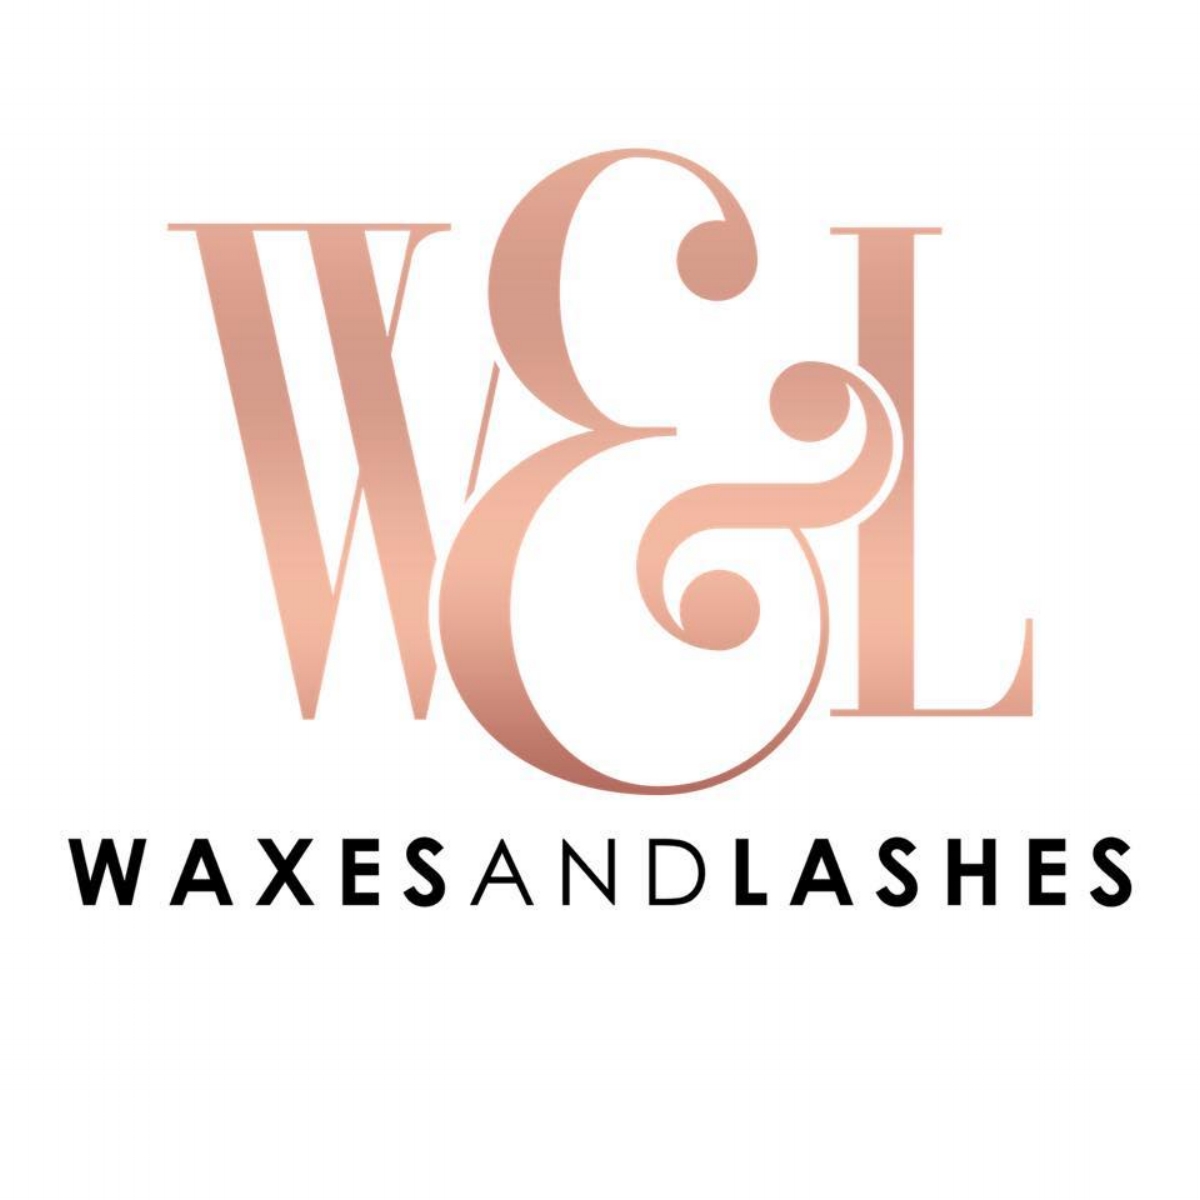 Waxes and Lashes